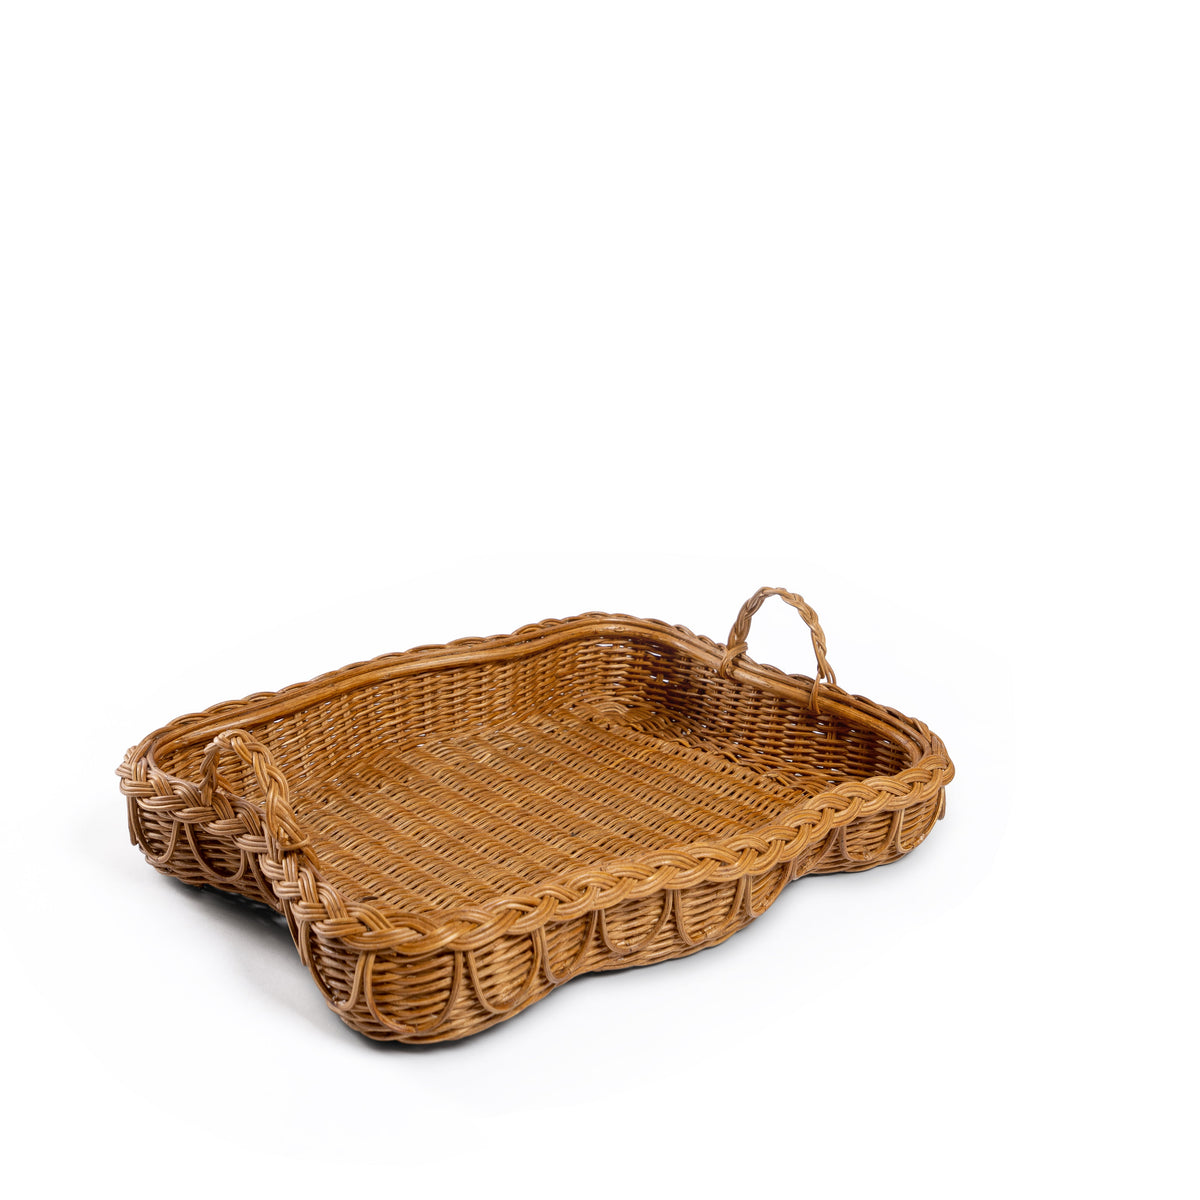 Side Photo of Sharland-England's Hadley tray Hand-crafted from 100% natural rattan, featuring fixed handles and a beautifully braided, scalloped edge